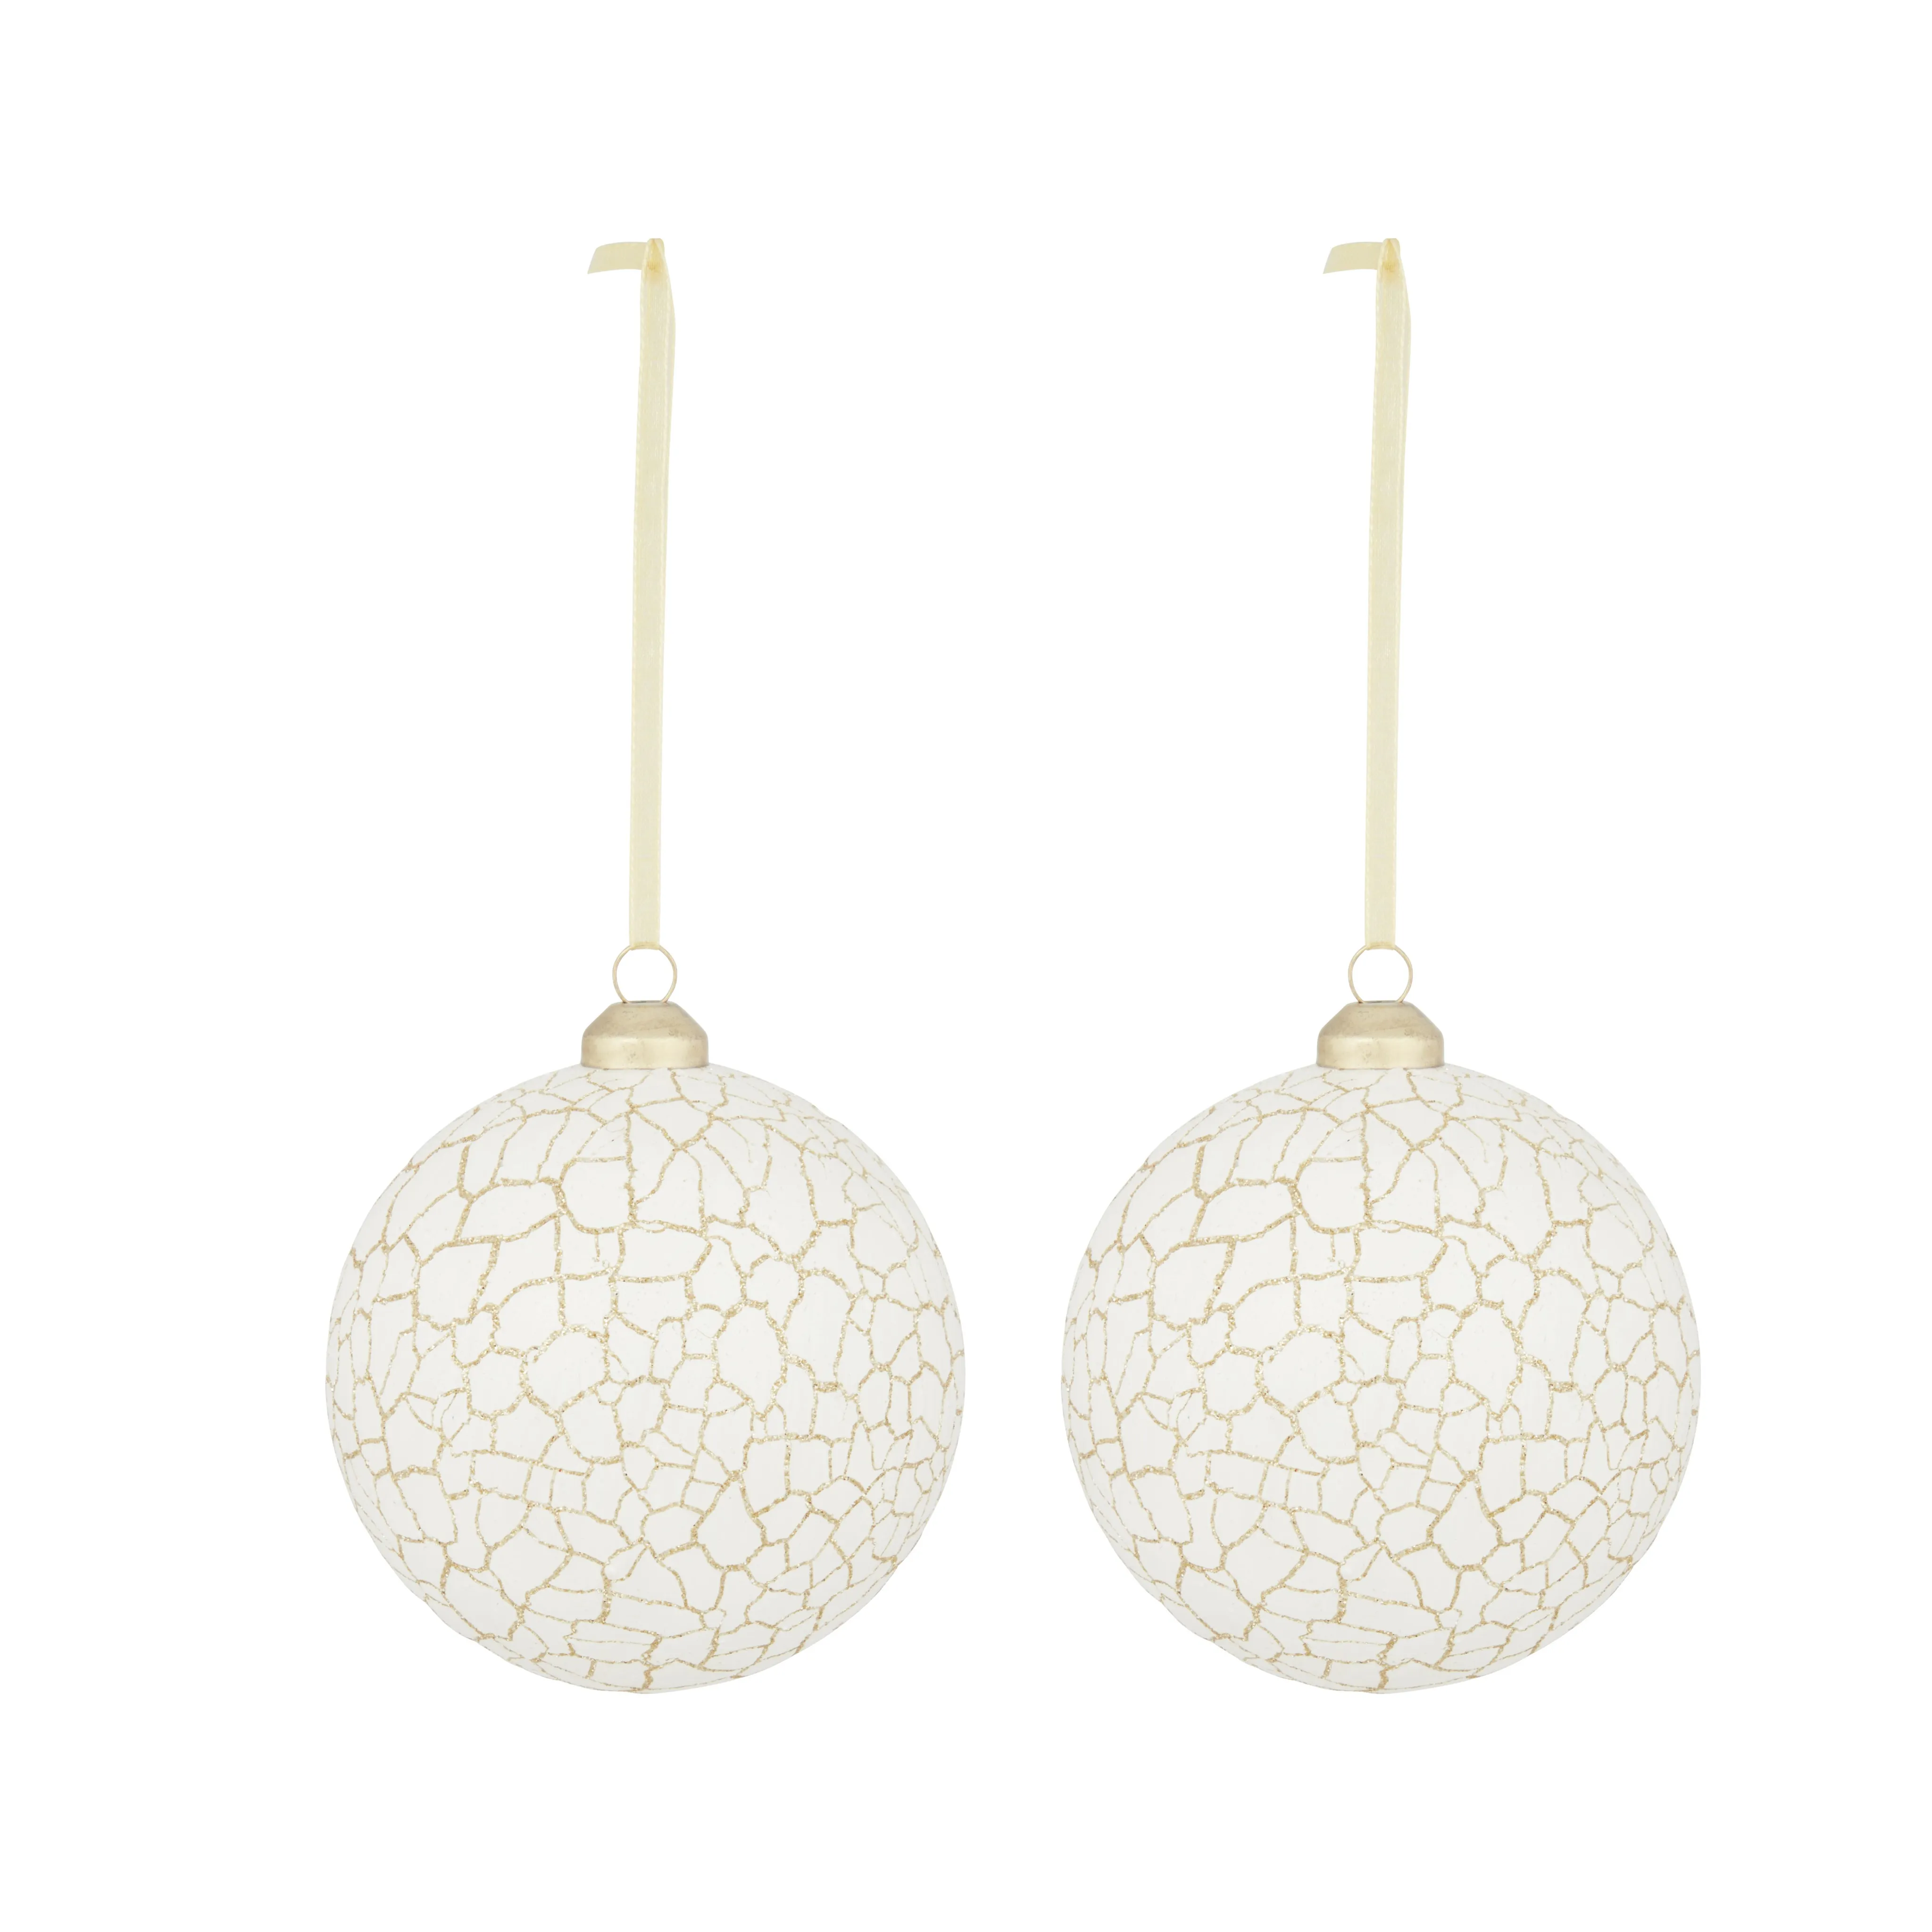 White & champagne Crackle effect Glaze Bauble, Set of 2